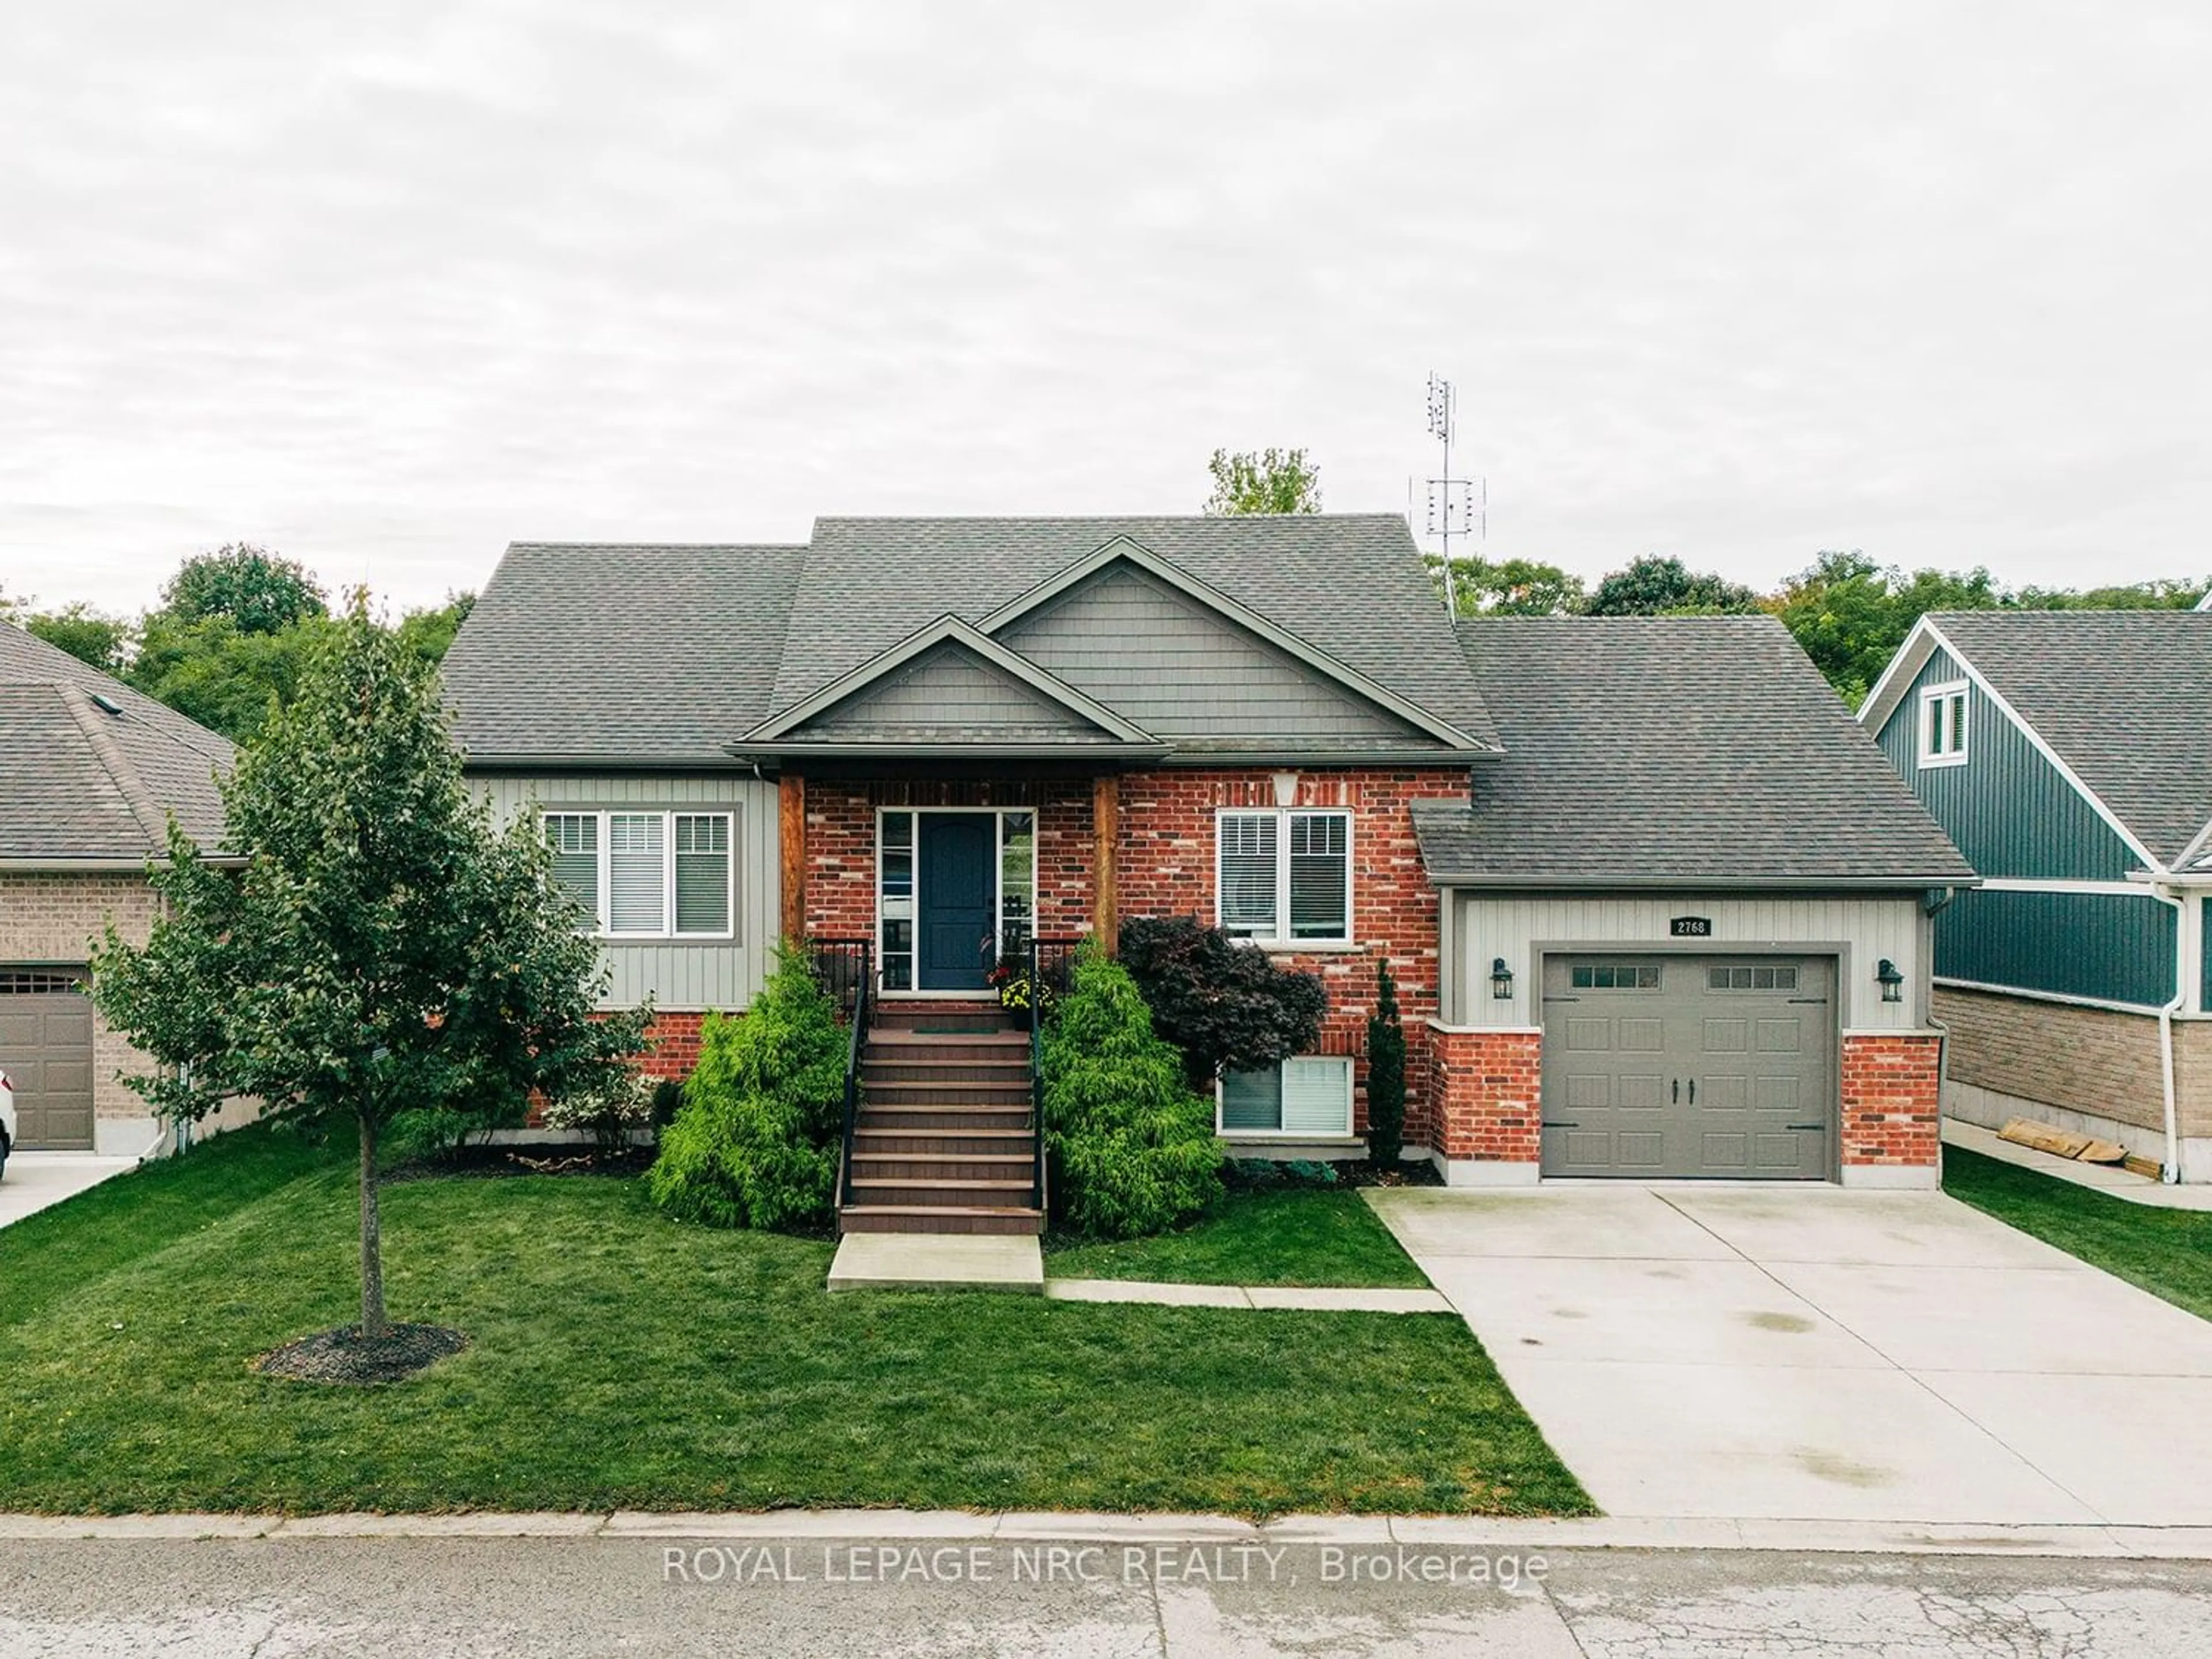 Home with brick exterior material for 2768 Chestnut St, Lincoln Ontario L0R 1S0